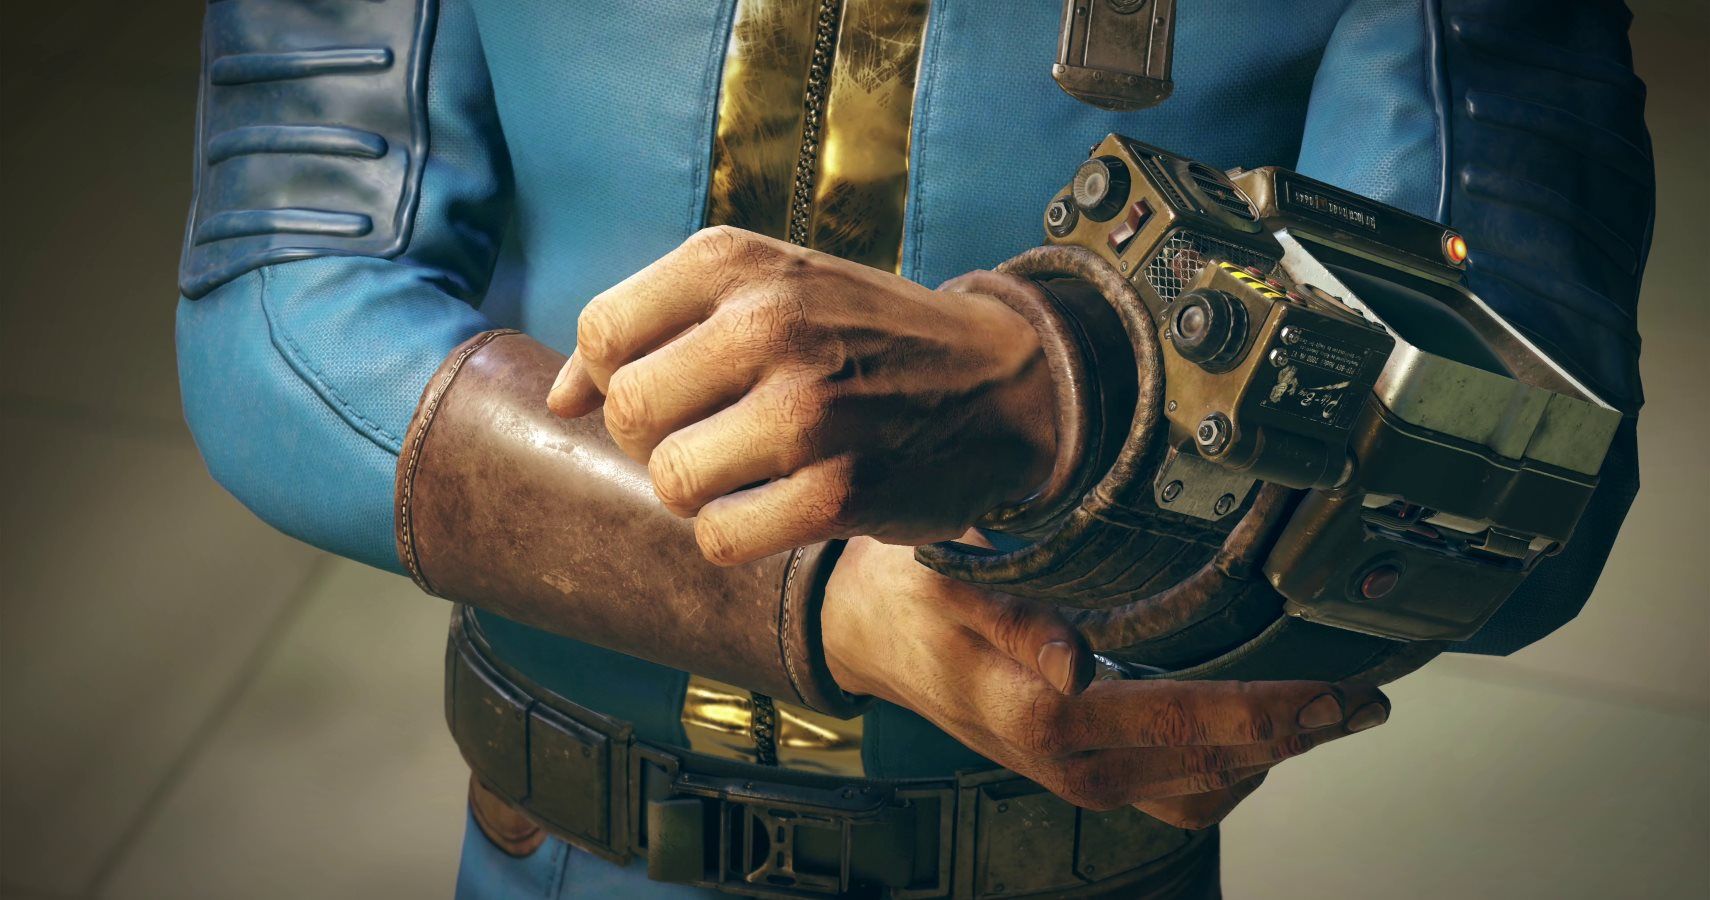 Sony Is Blocking Crossplay For Fallout 76, According To Todd Howard